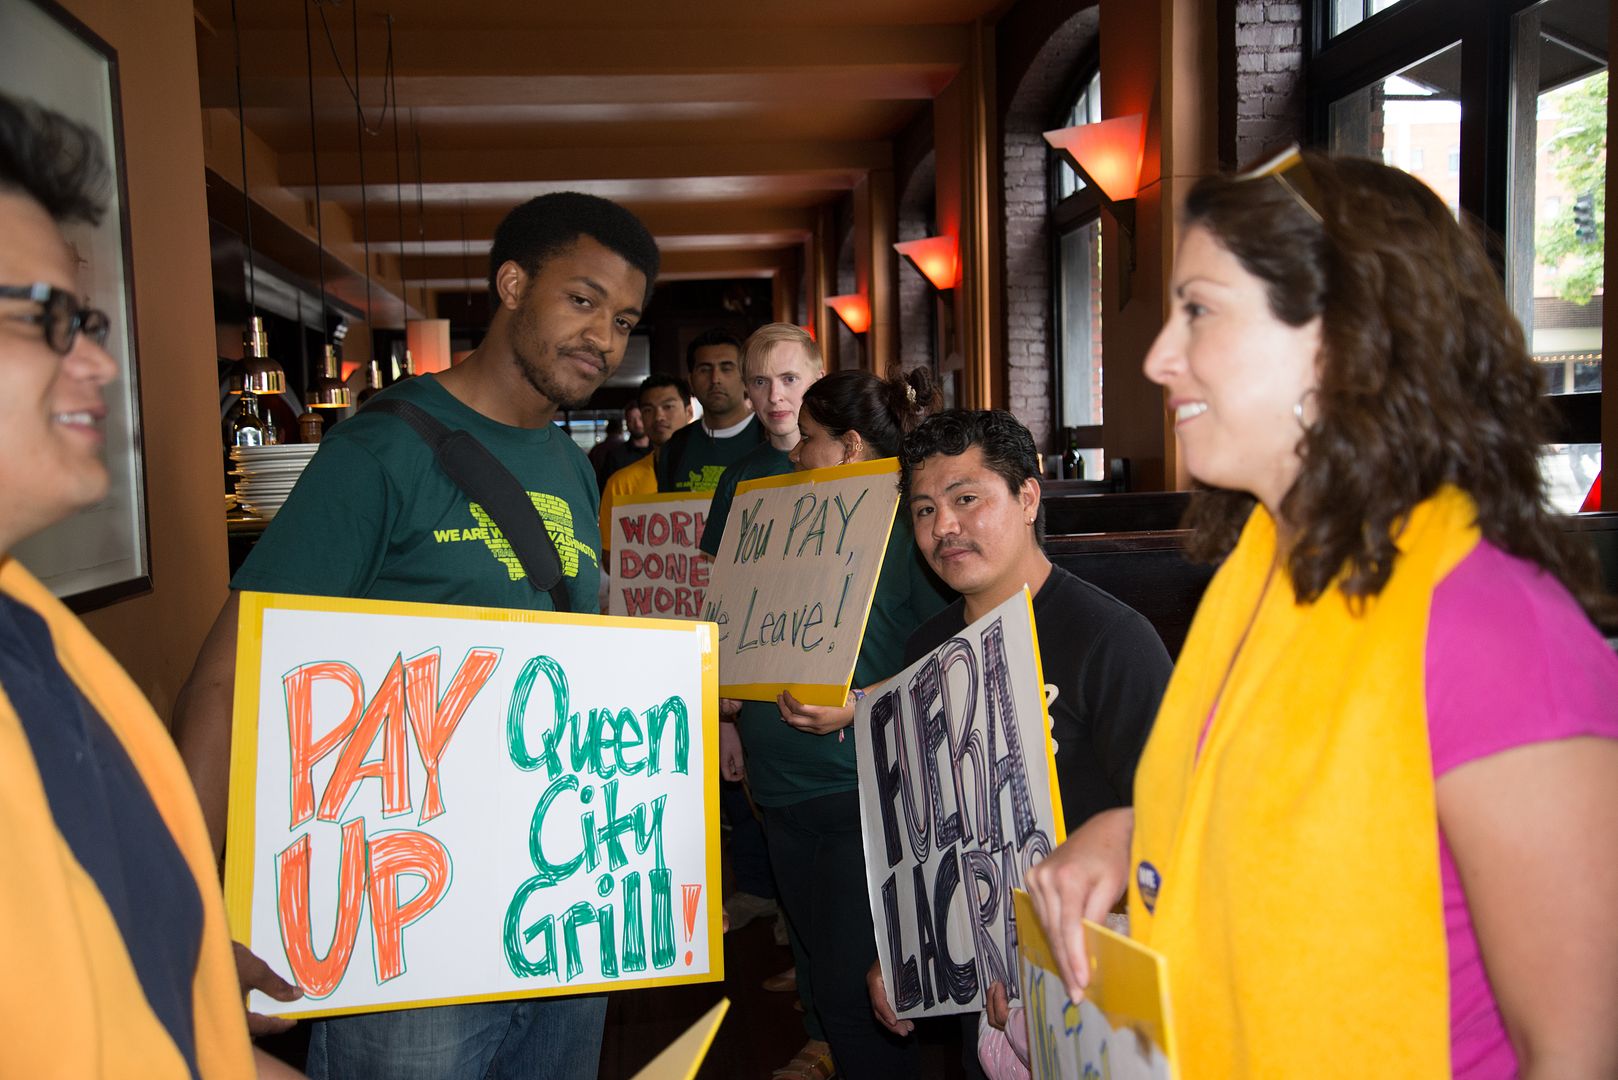 Protesters at Queen City Grill.